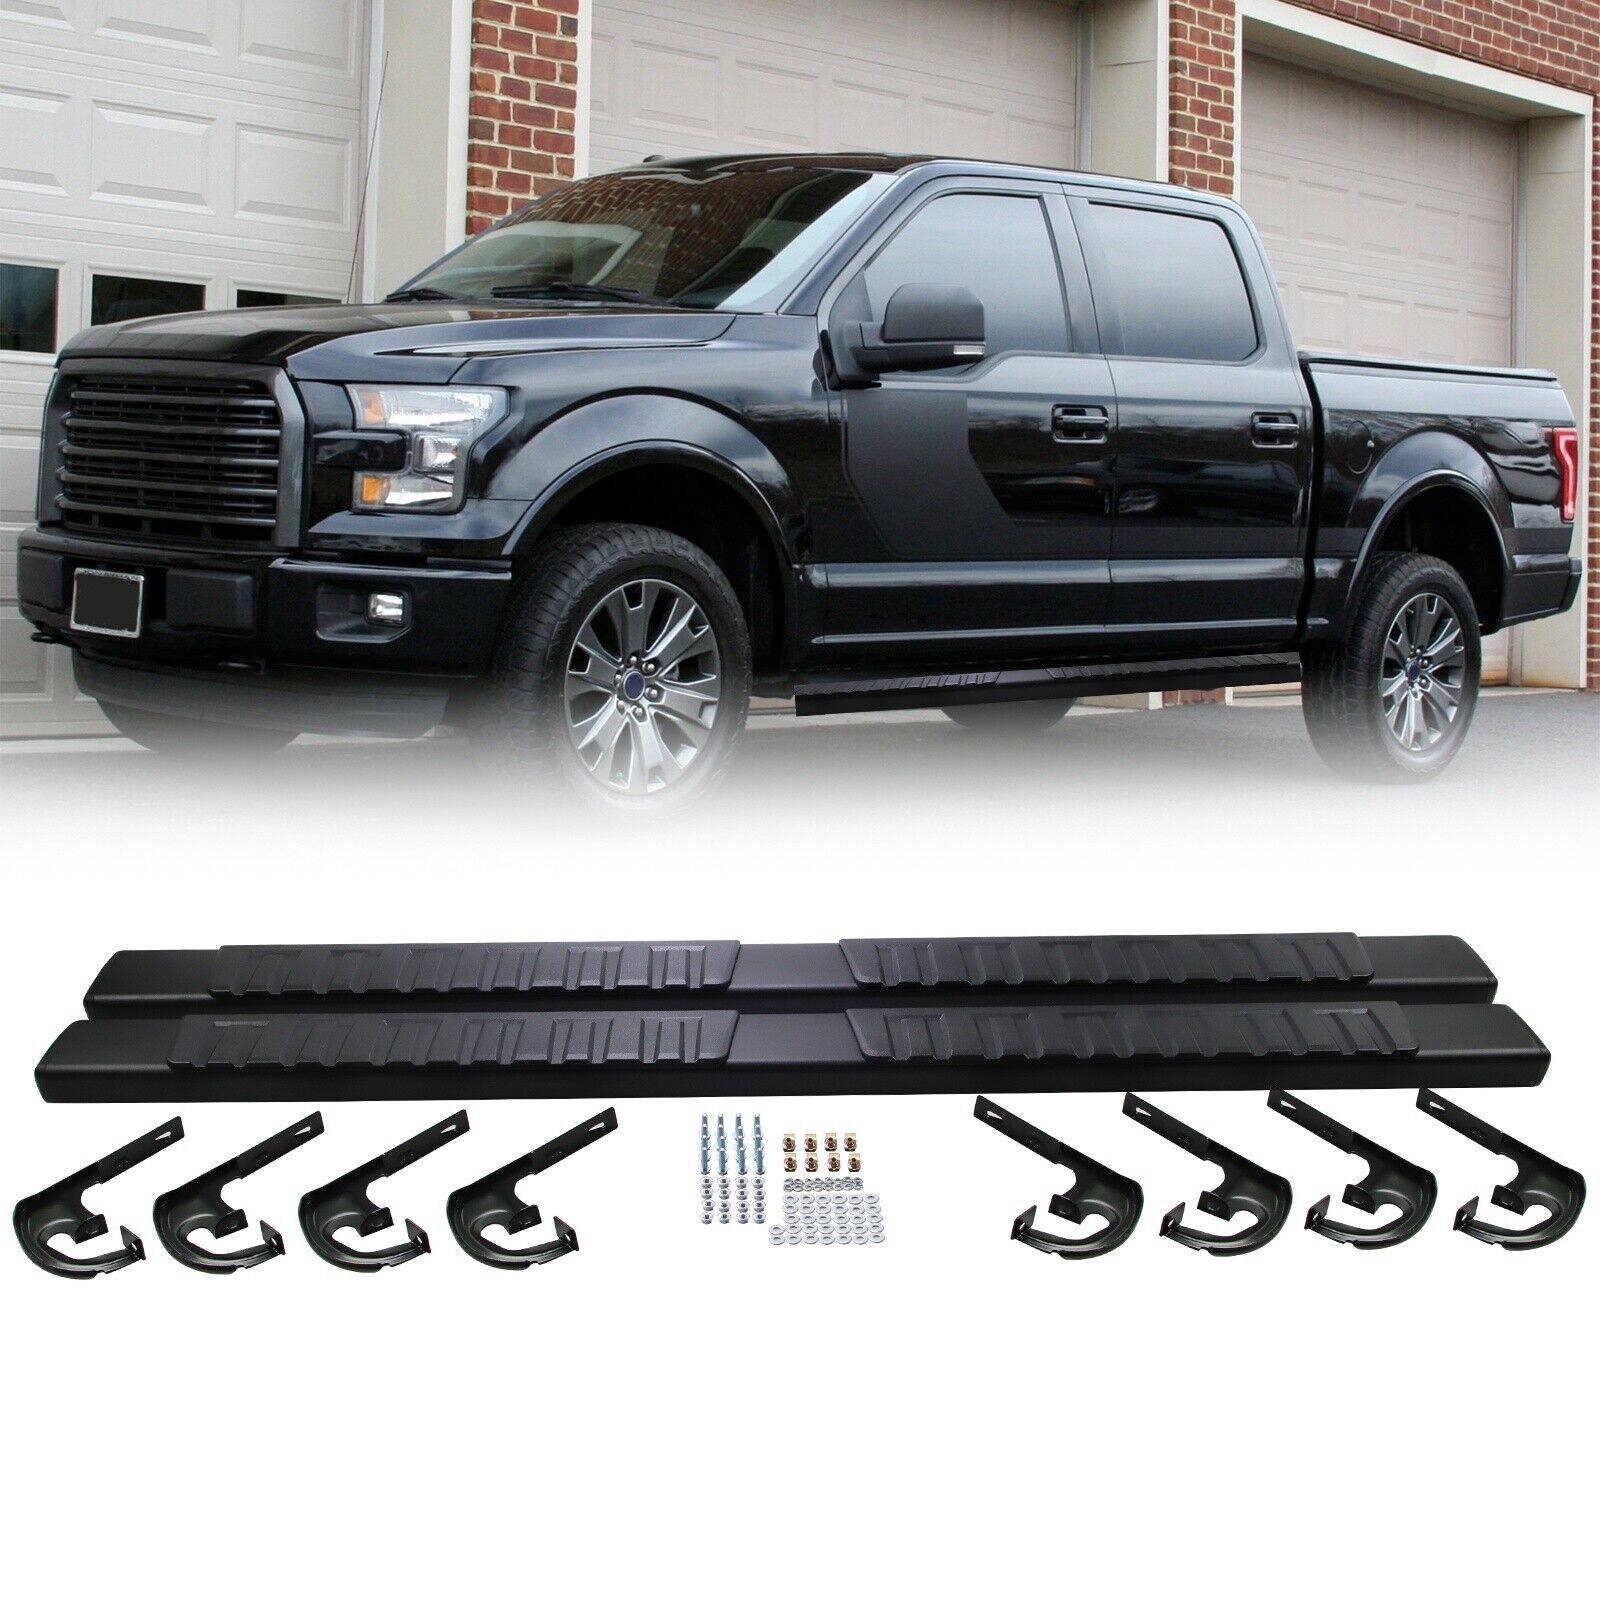 Running Boards for Ford F-150 - Fits 2009-2014 Models